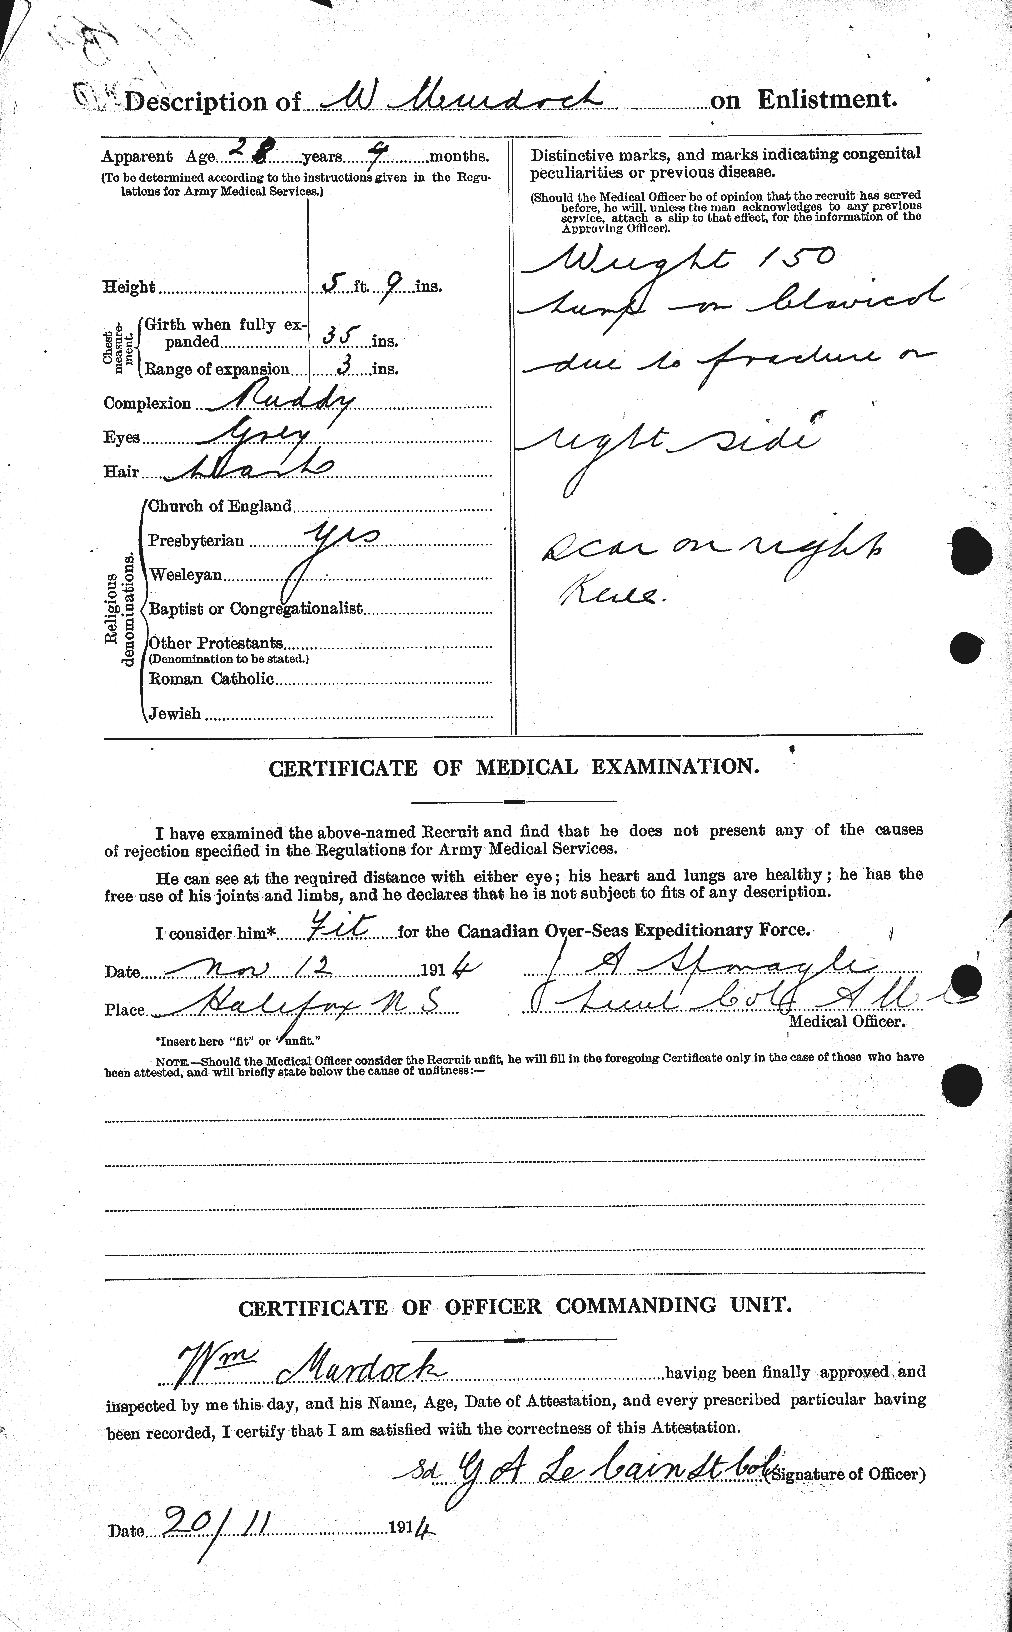 Personnel Records of the First World War - CEF 510887b